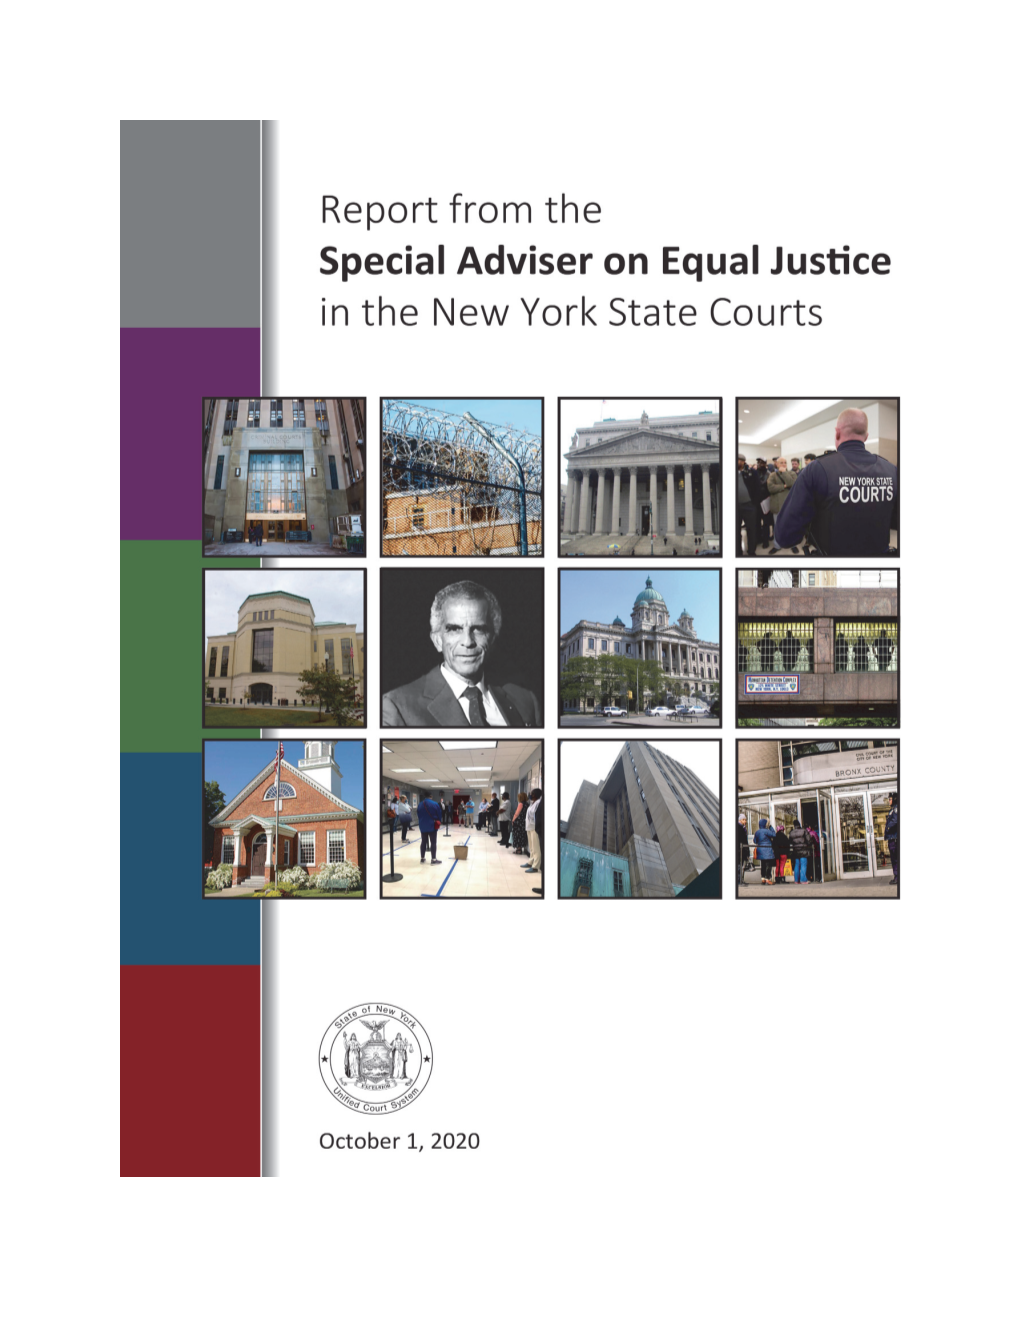 Report from the Special Adviser on Equal Justice in New York State